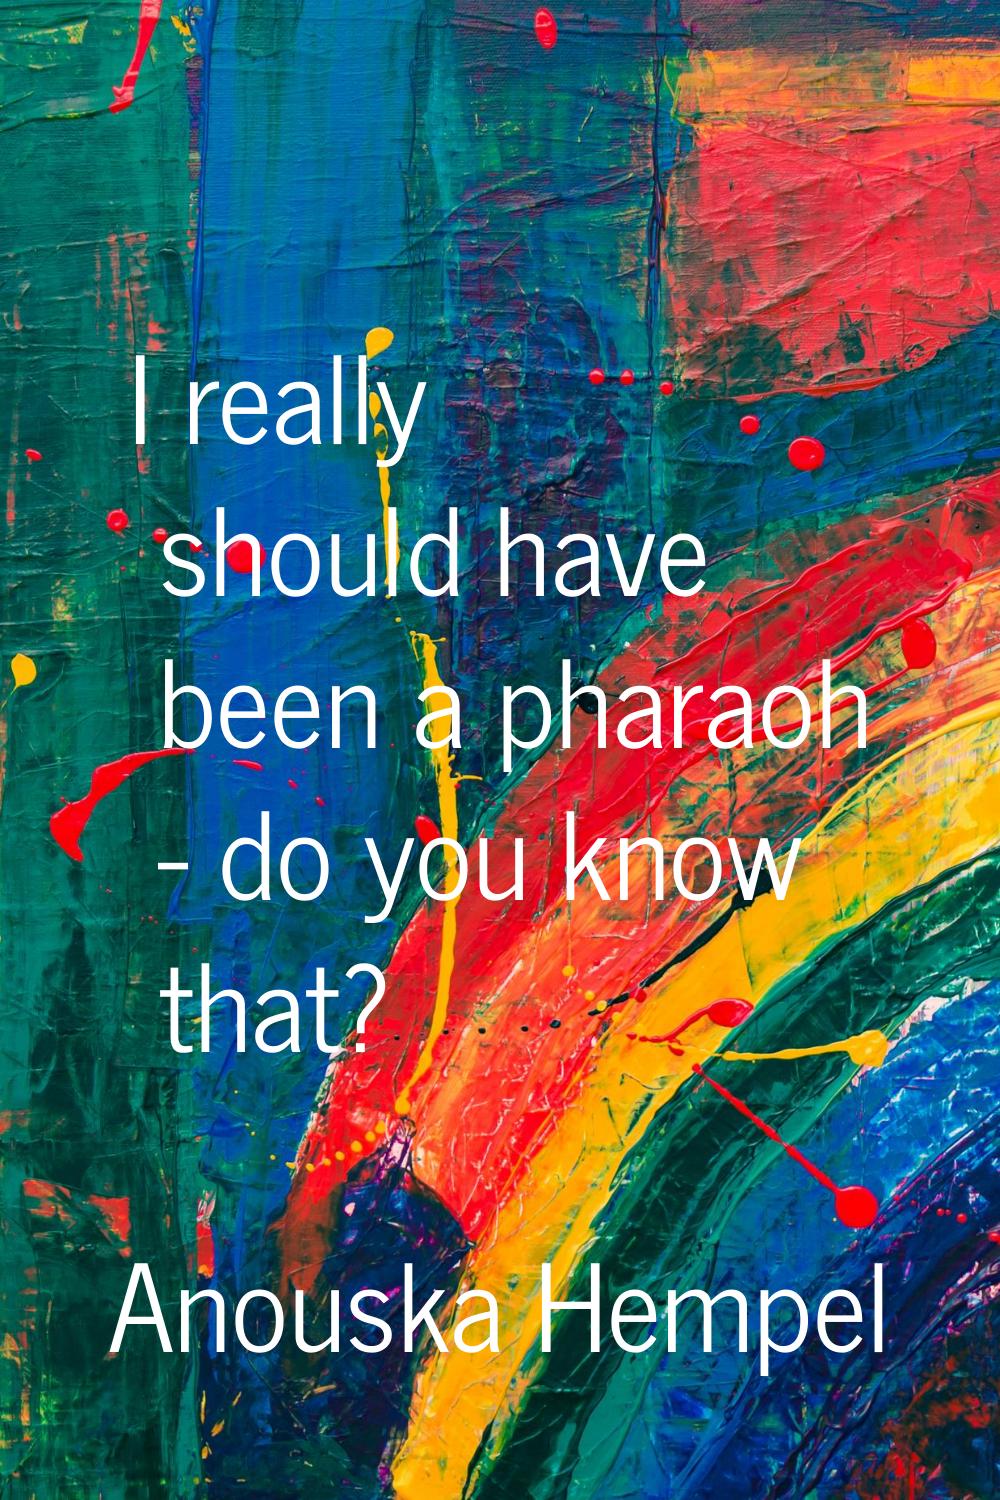 I really should have been a pharaoh - do you know that?